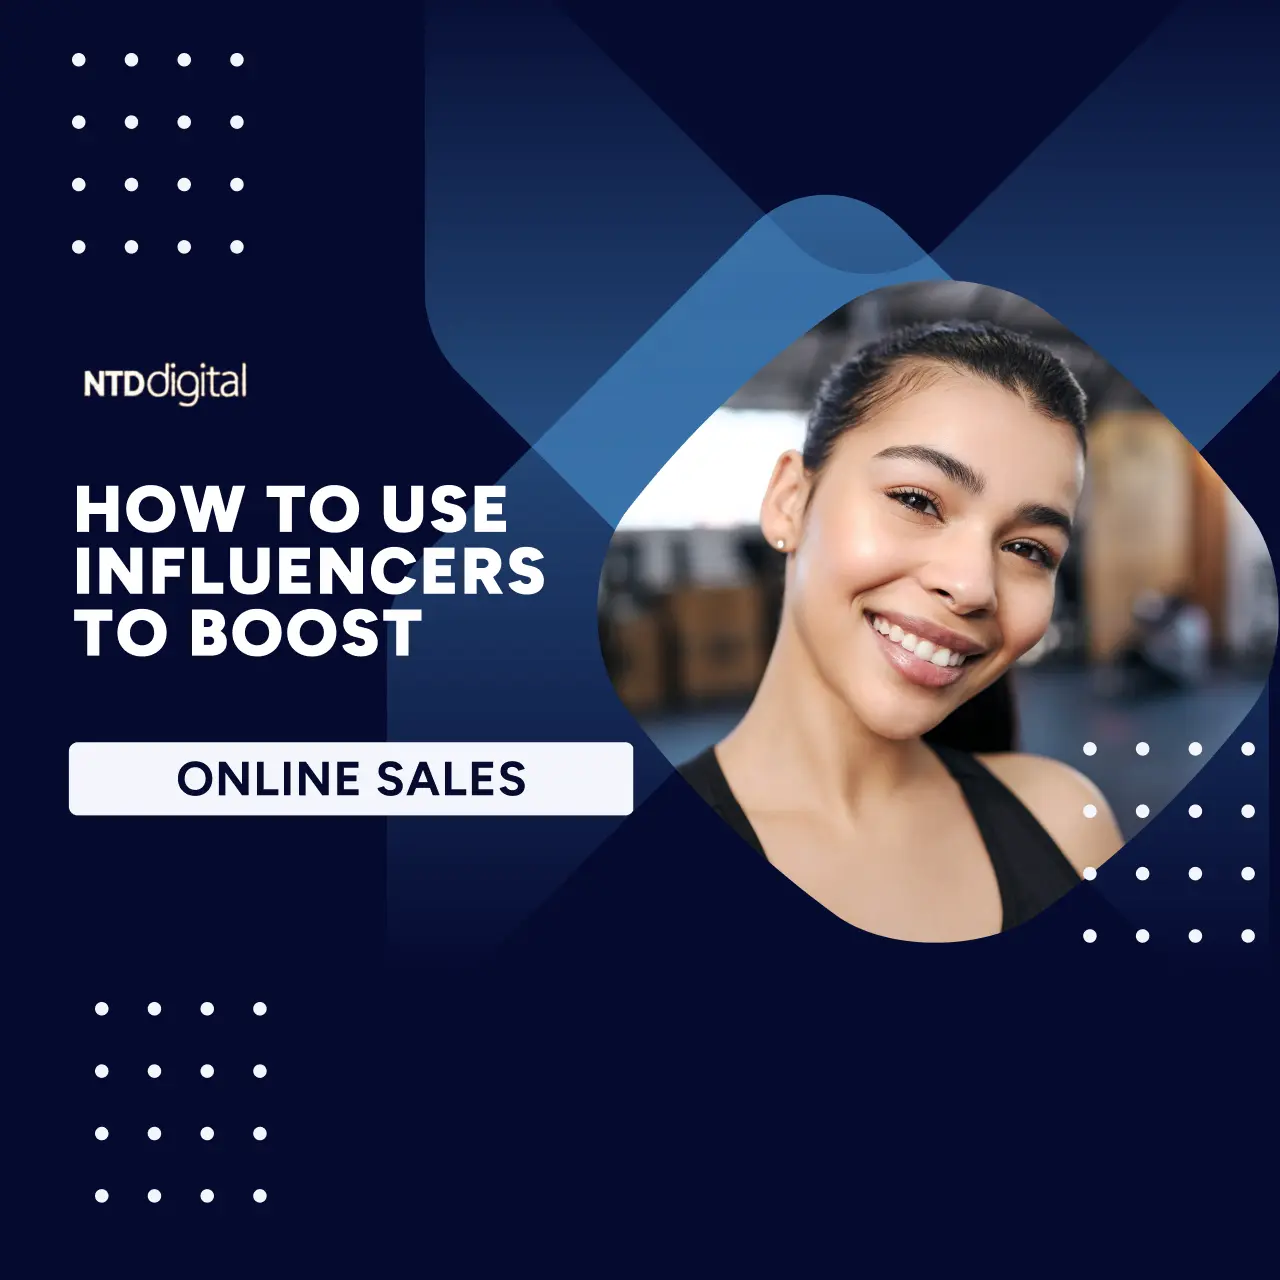 Influencer Marketing: How to Use Influencers to Boost Online Sales